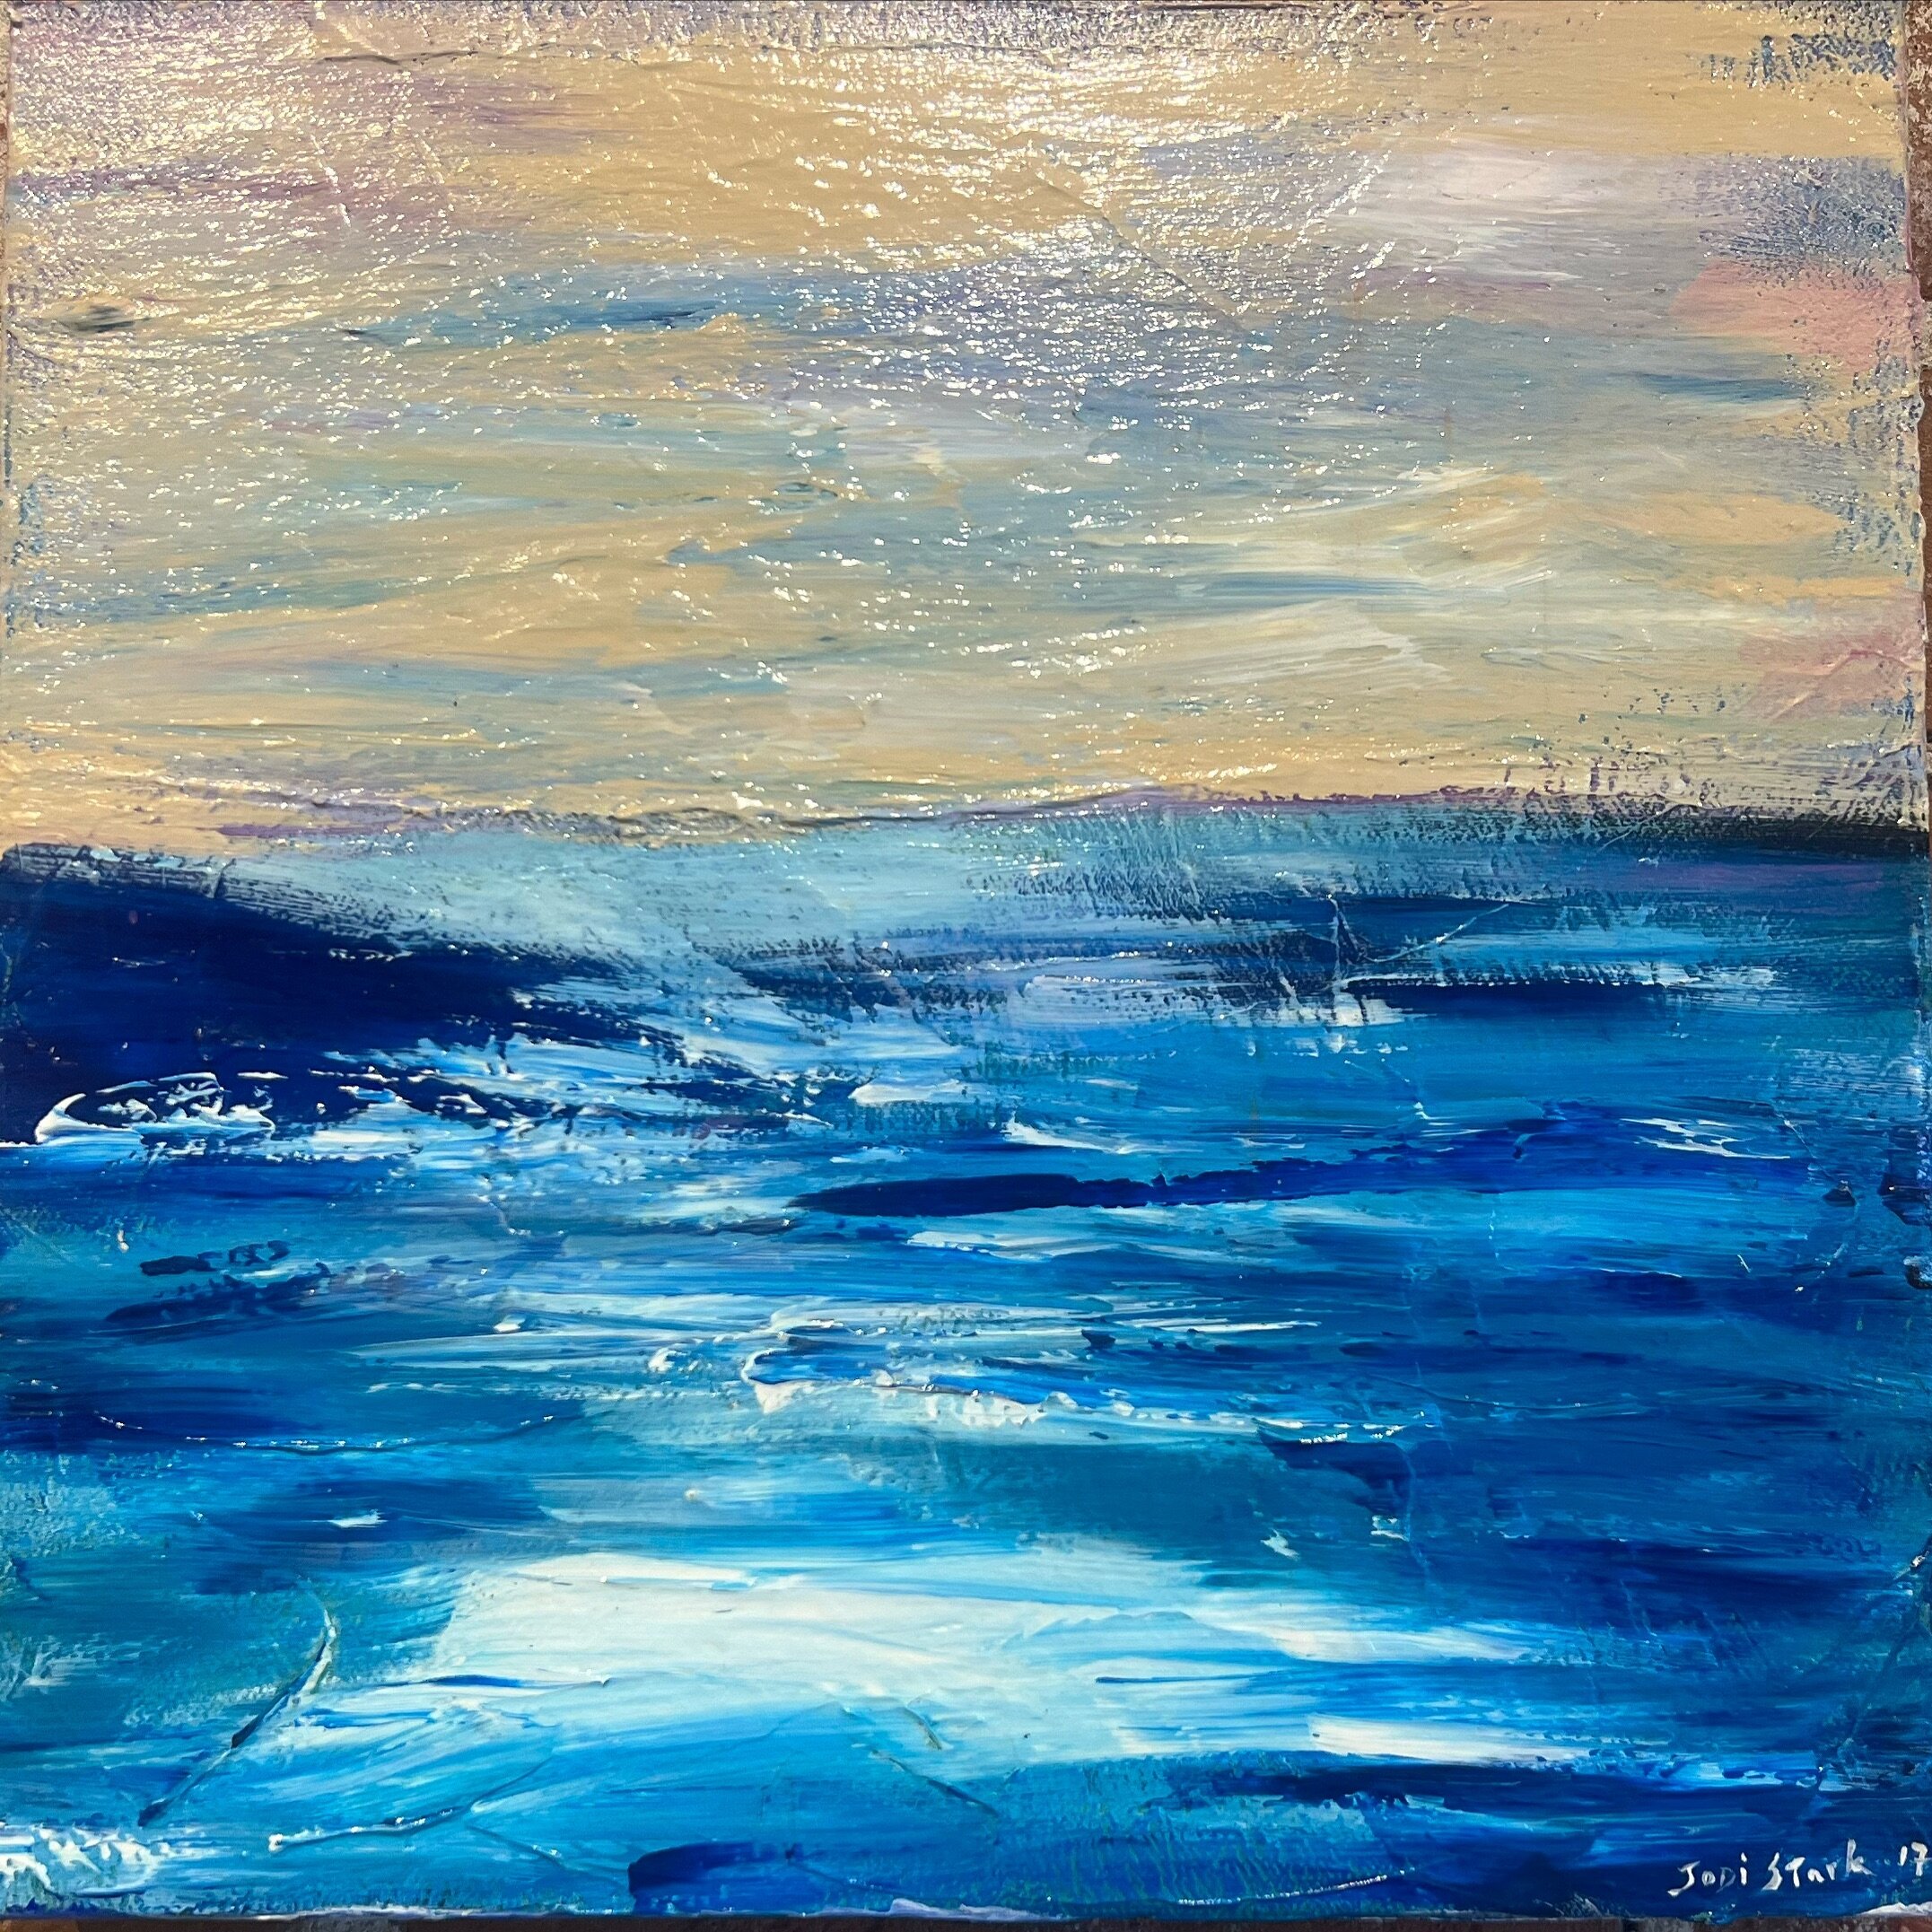 &ldquo;A Calming Evening Sky&rdquo;, by Jodi Stark @jodistarkartist , 10 x 10 acrylic on canvas, $150, As part of our Artful Elements show running along the big brick wall in our gallery space. Bright abstractions seem to be the name of the game this